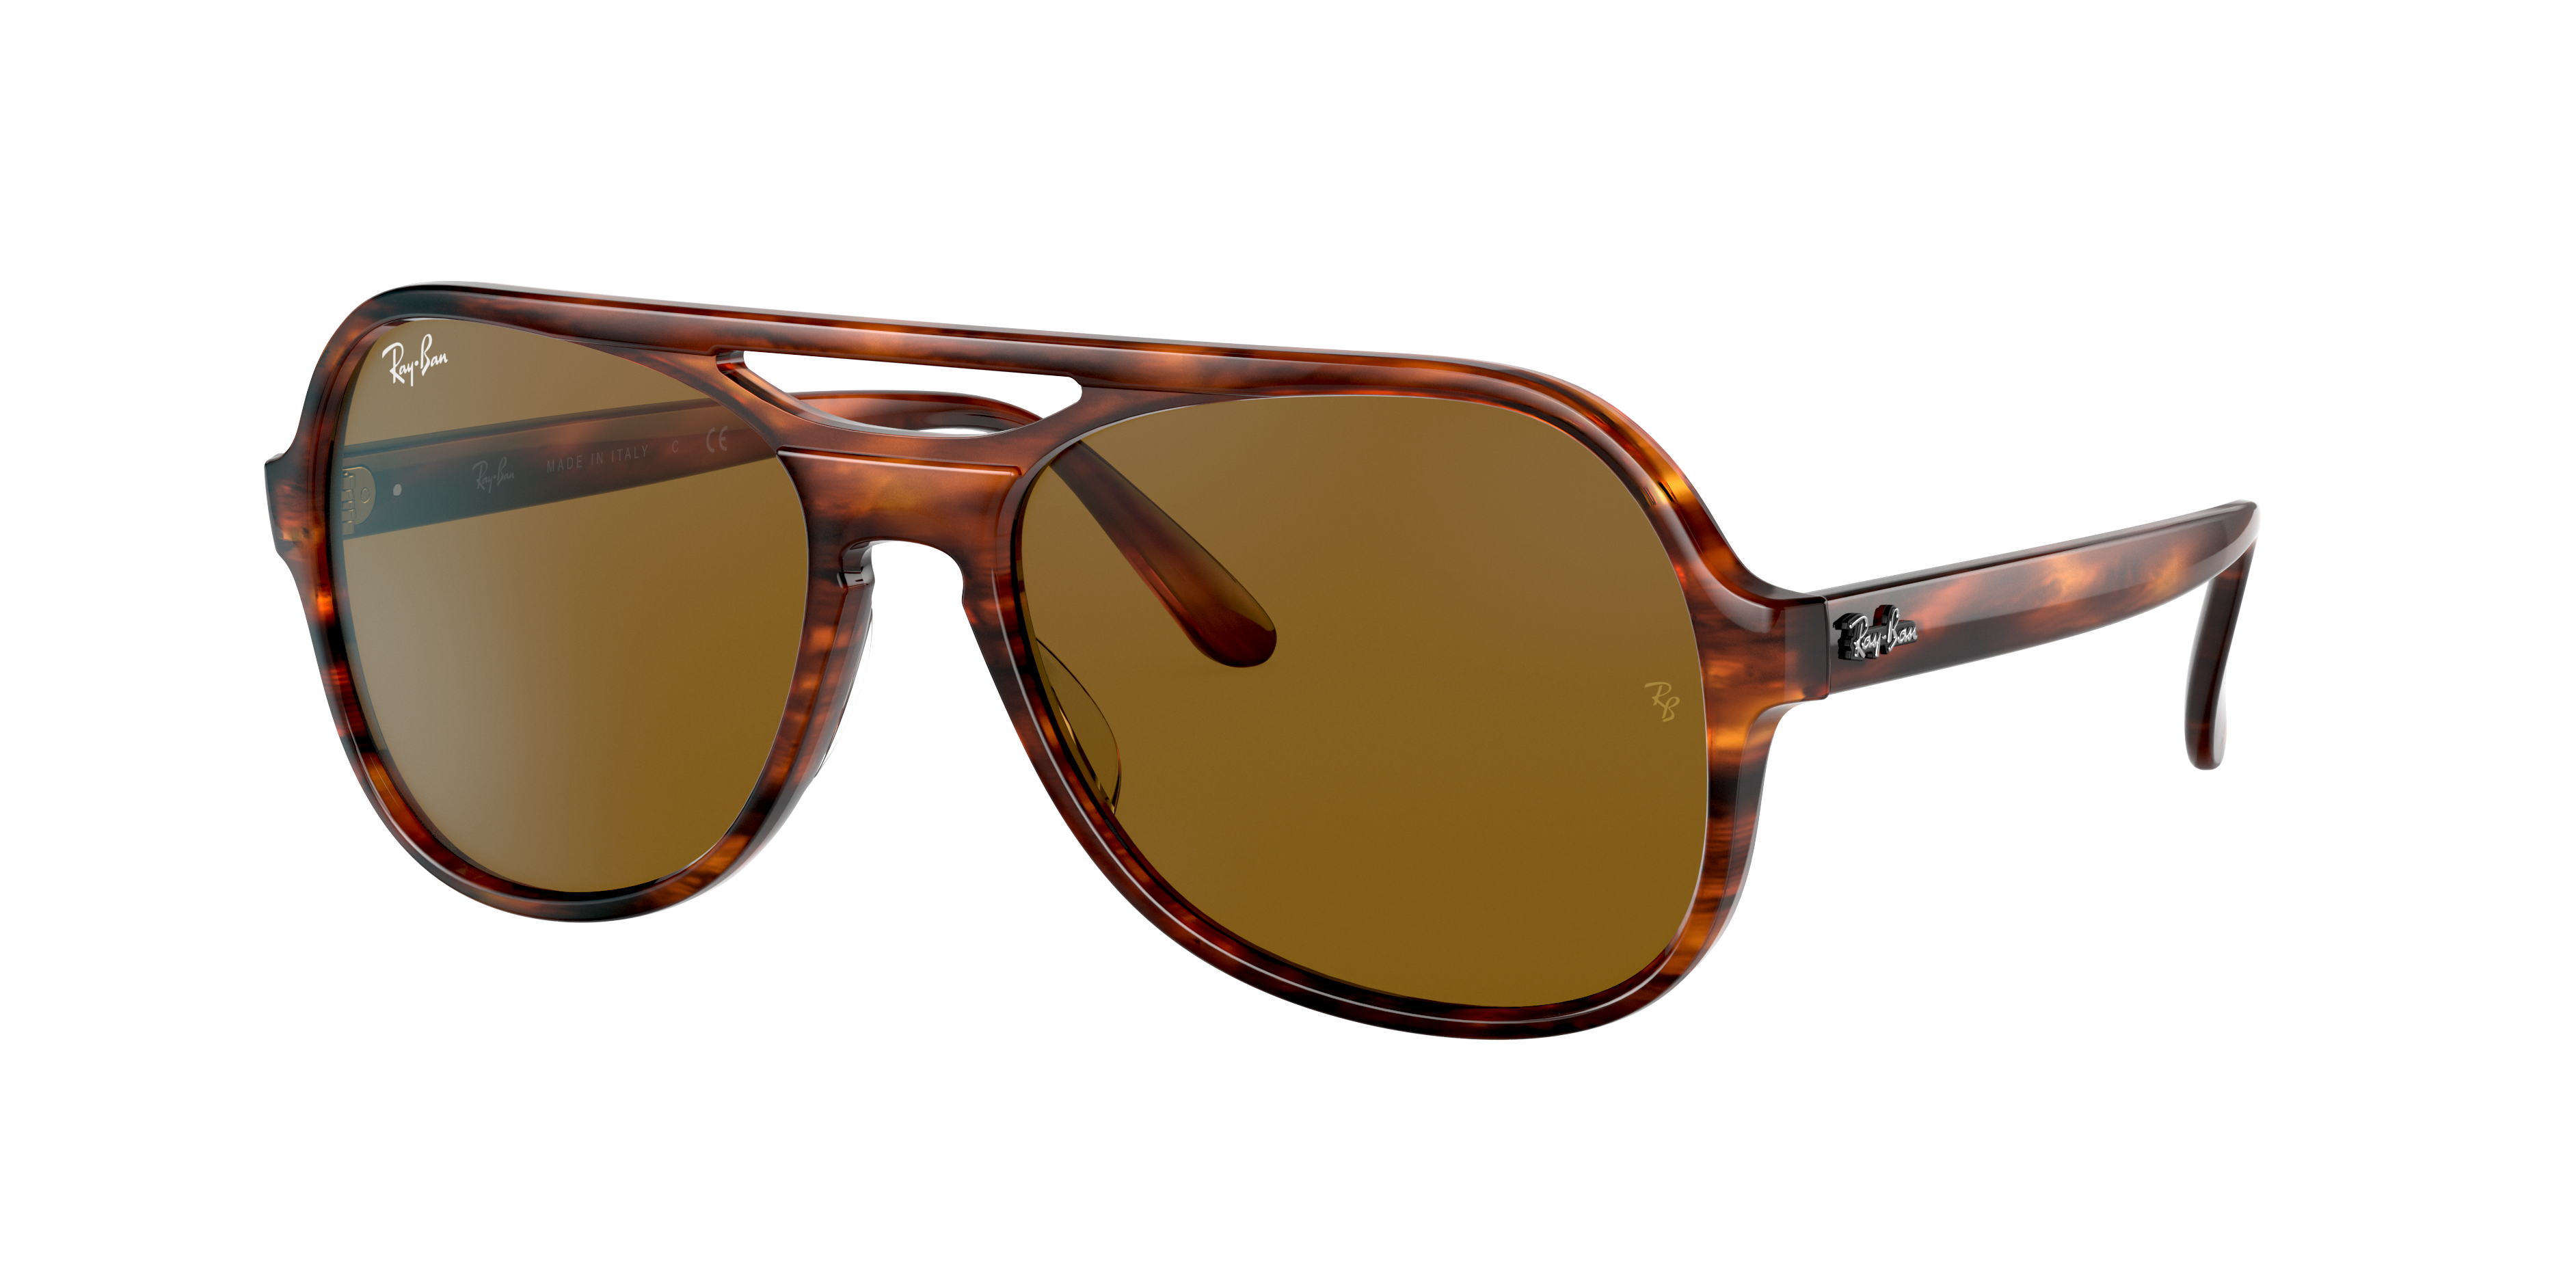 Ray Ban Rb4357 Sunglasses In Tortoise